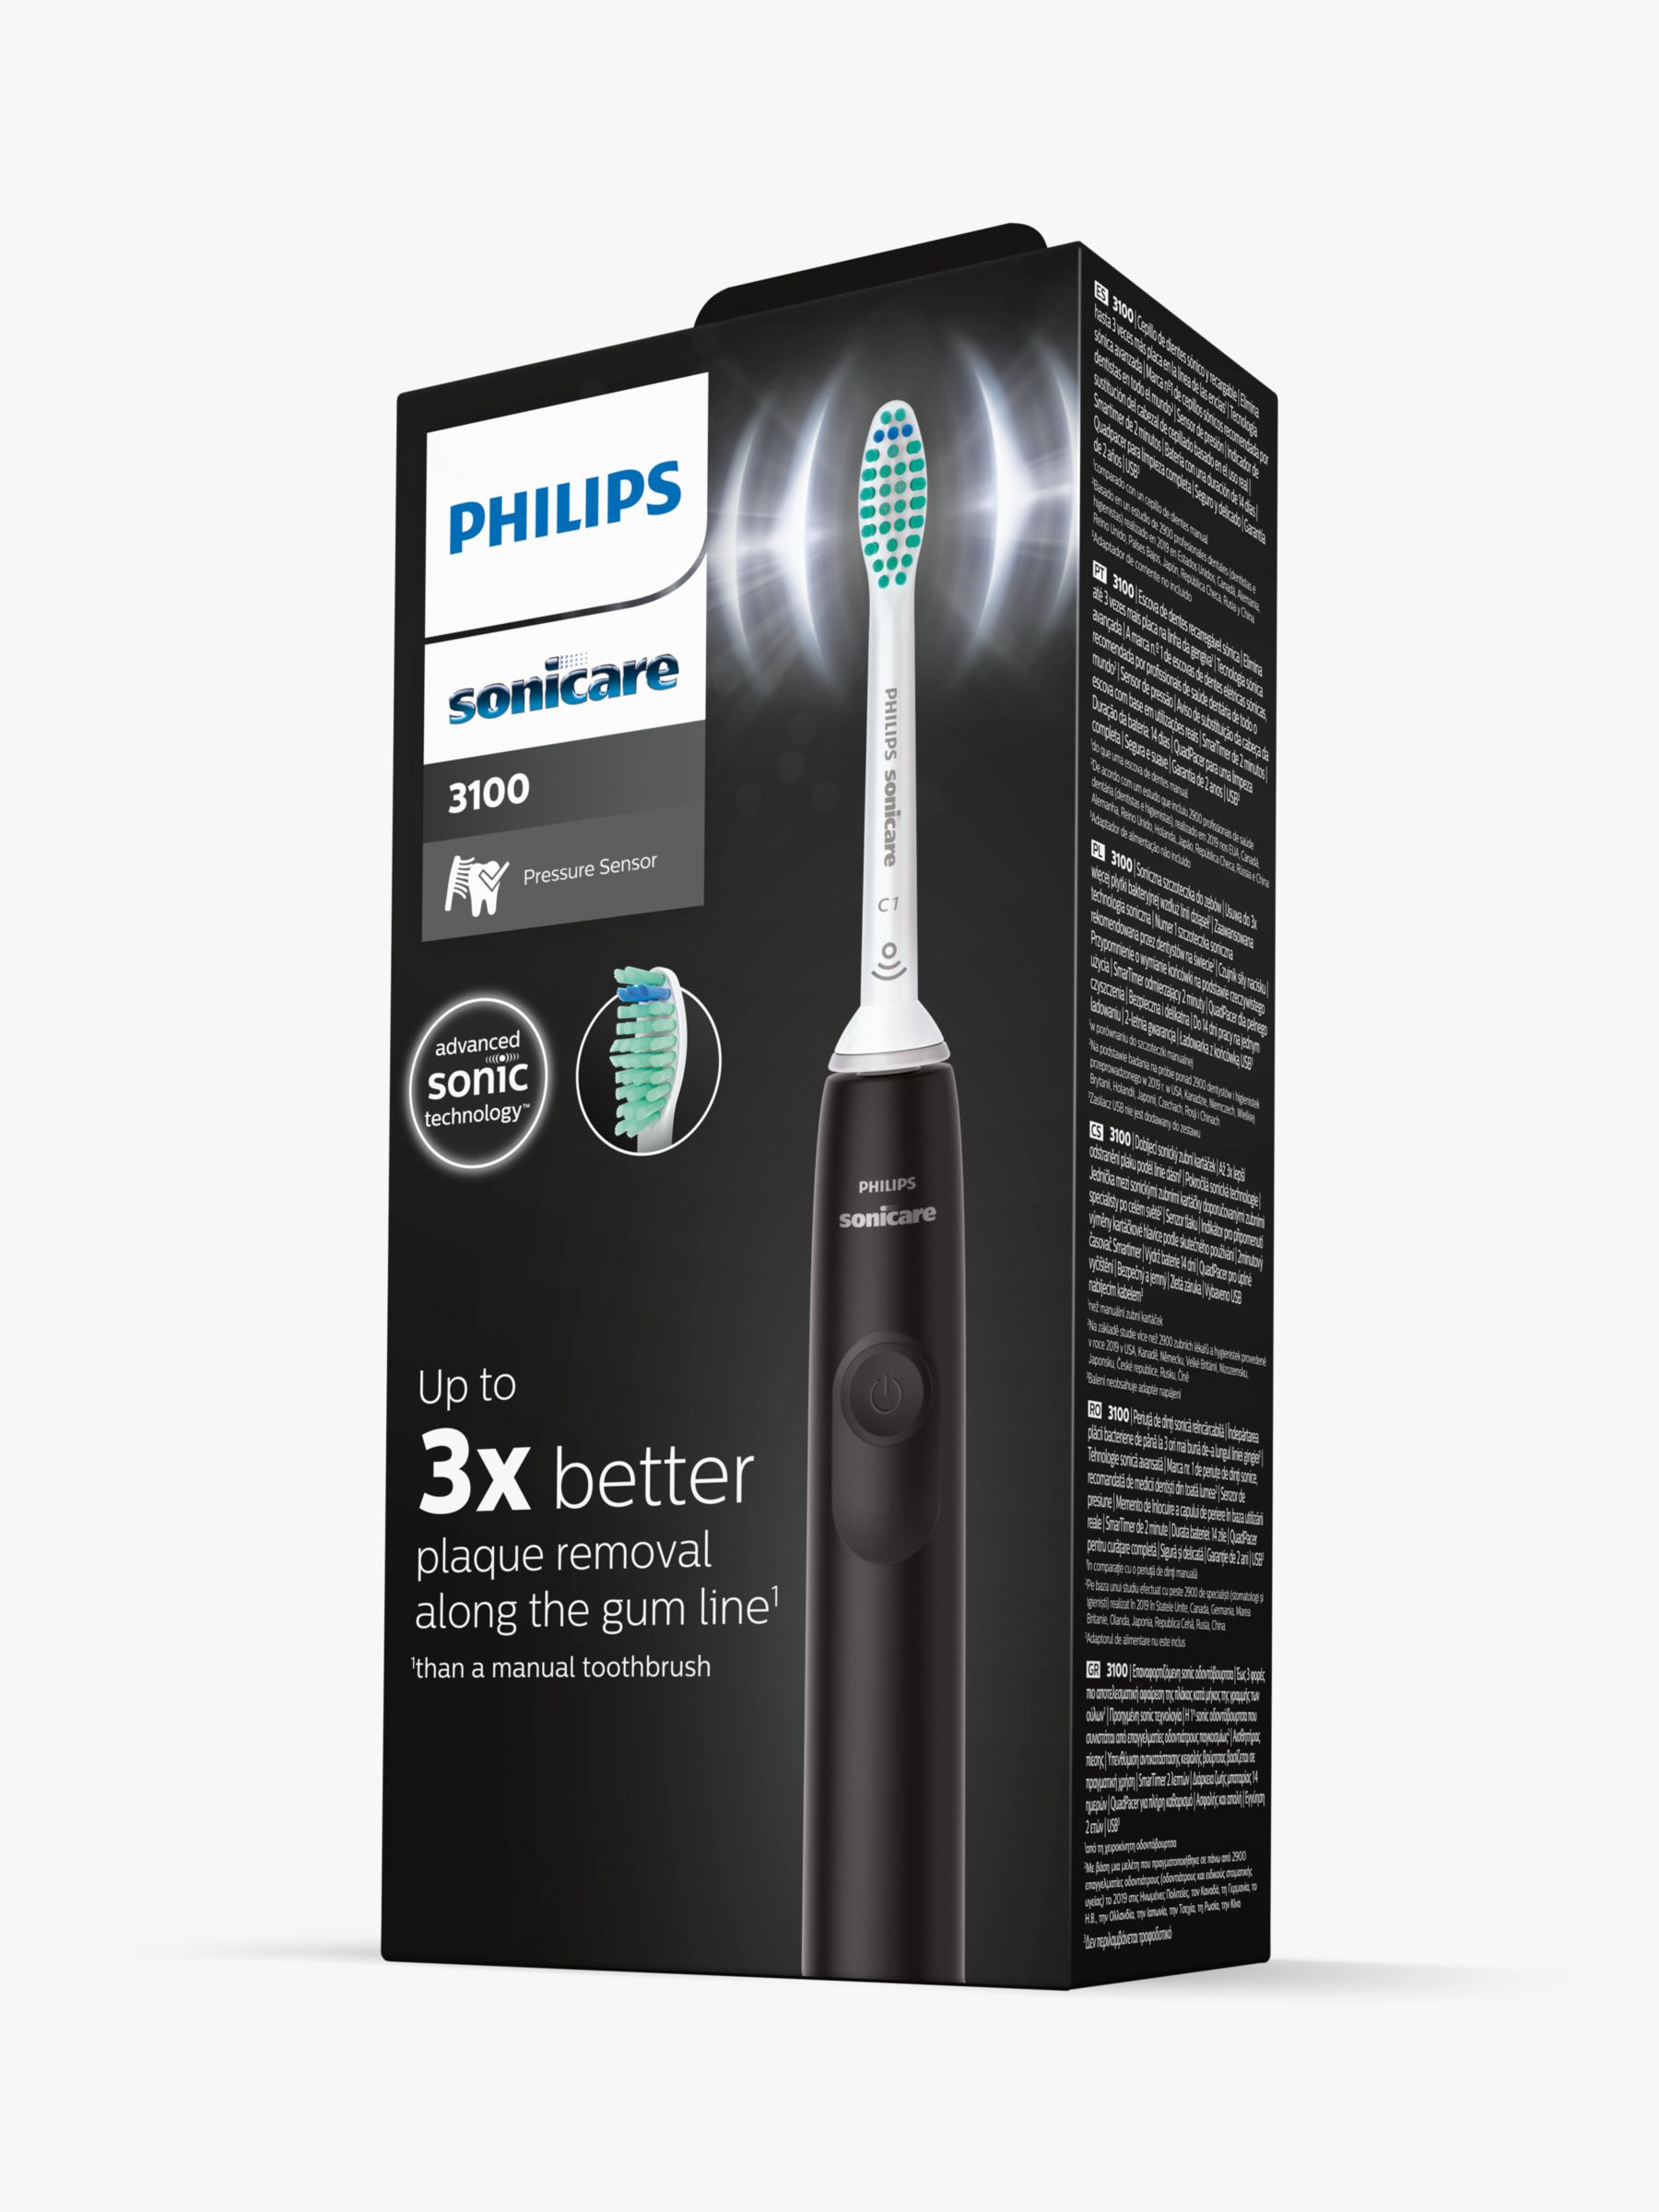 Philips Sonicare Series 3100 Electric Toothbrush, Black